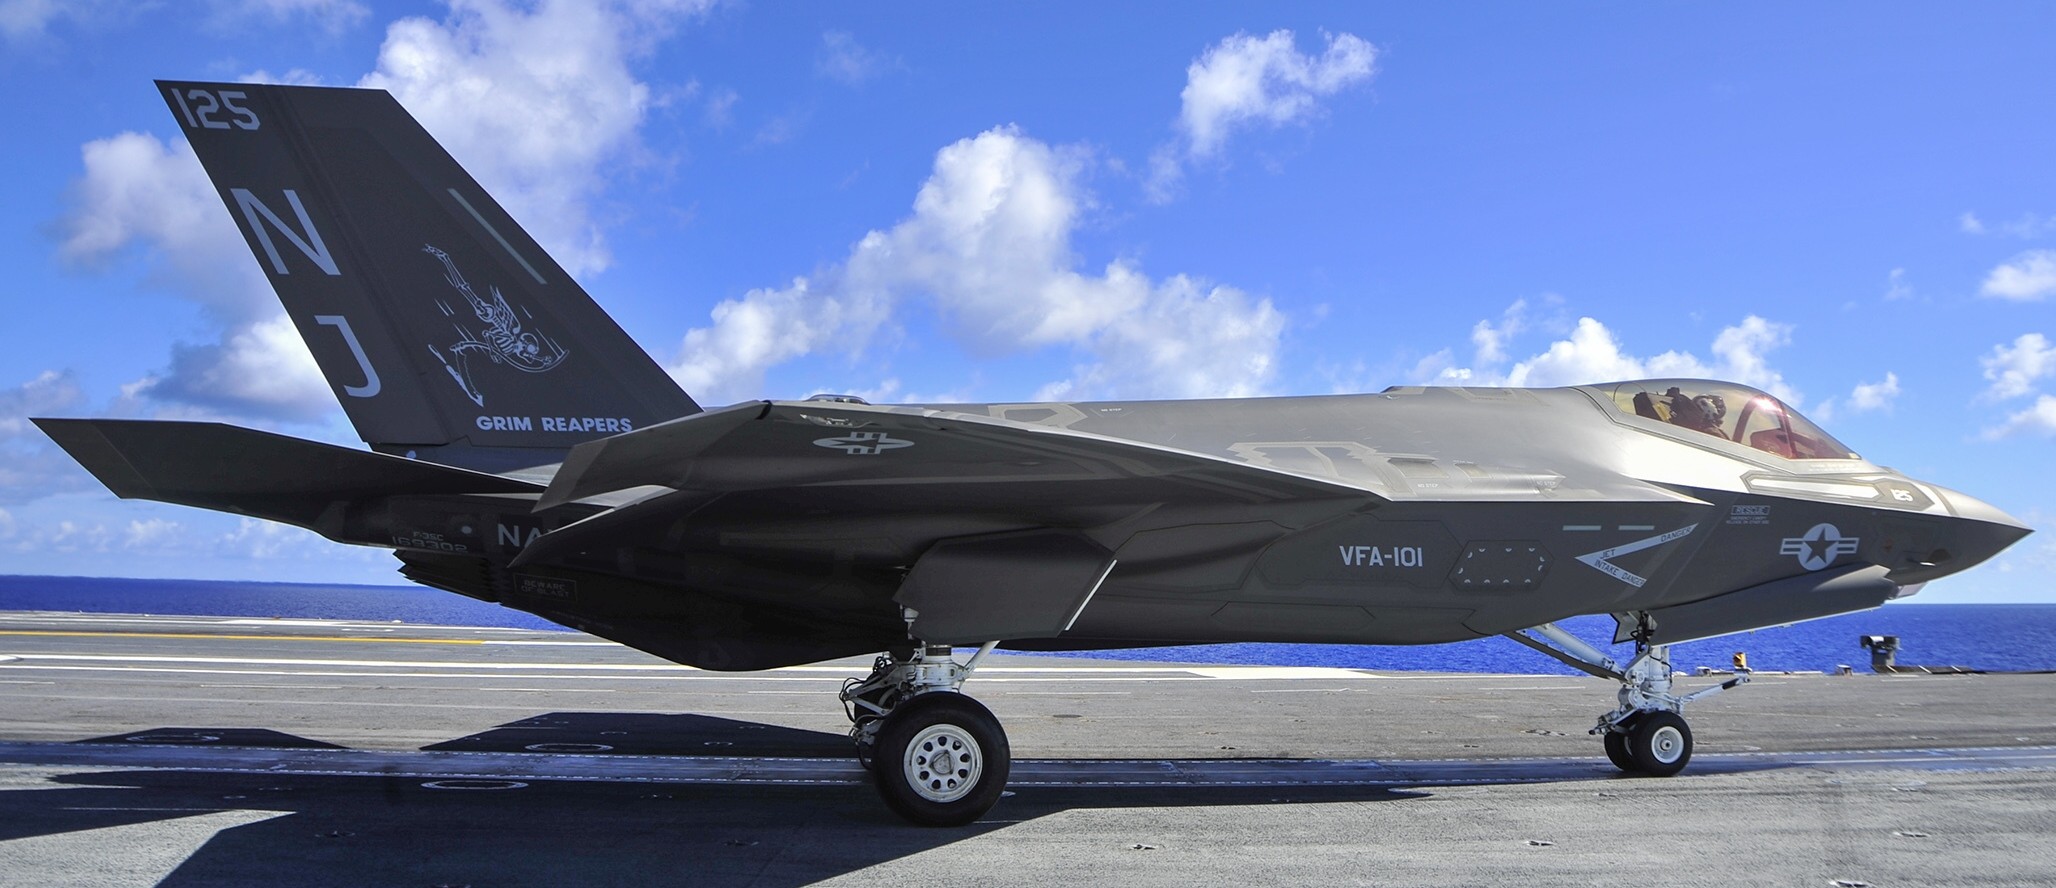 vfa-101 grim reapers strike fighter squadron us navy f-35c lightning jsf frs 14